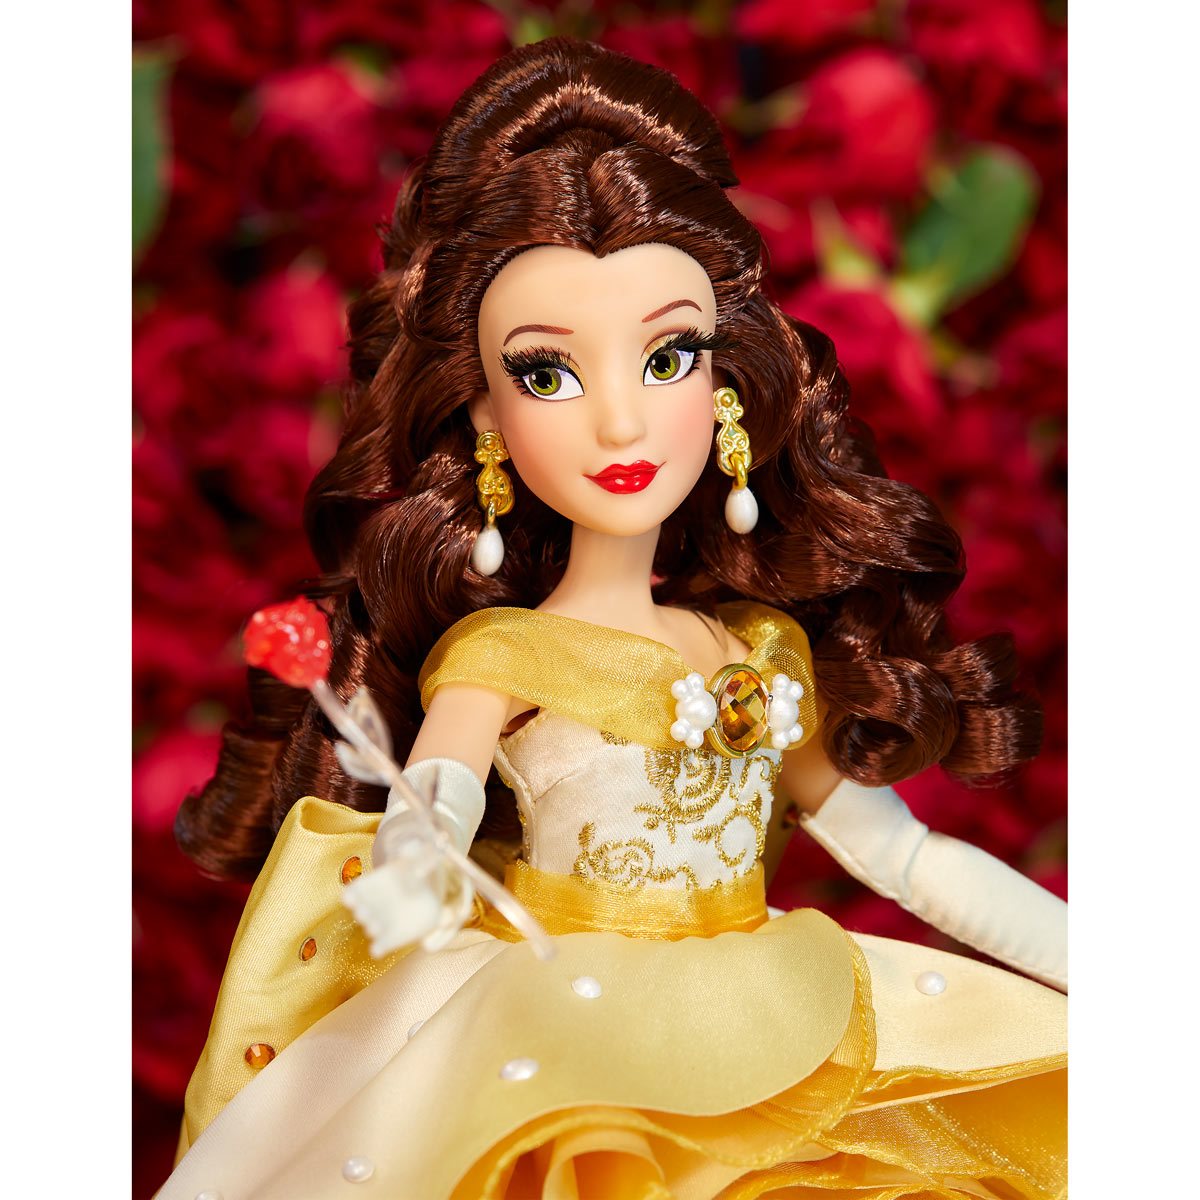 Disney Collection Beauty and The Beast Princess Belle Doll